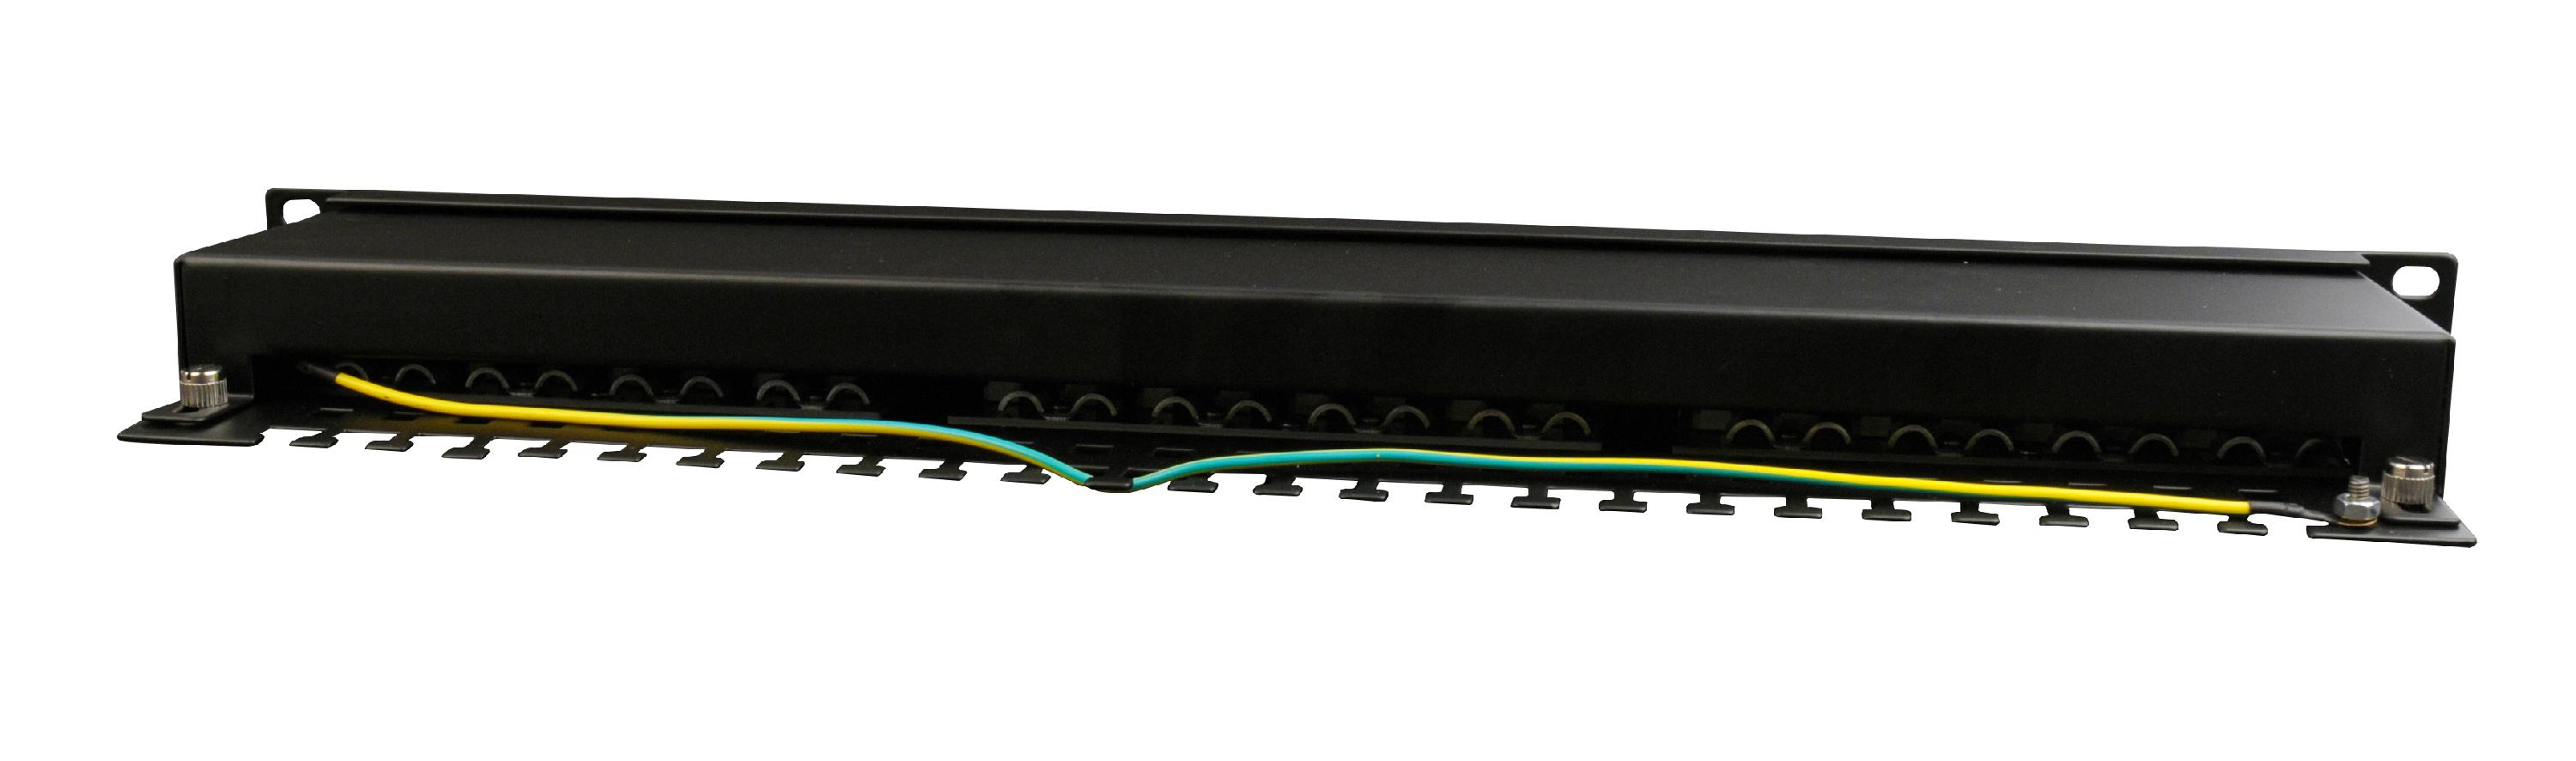 Gembird Cat5e 24-poorts patchpanel